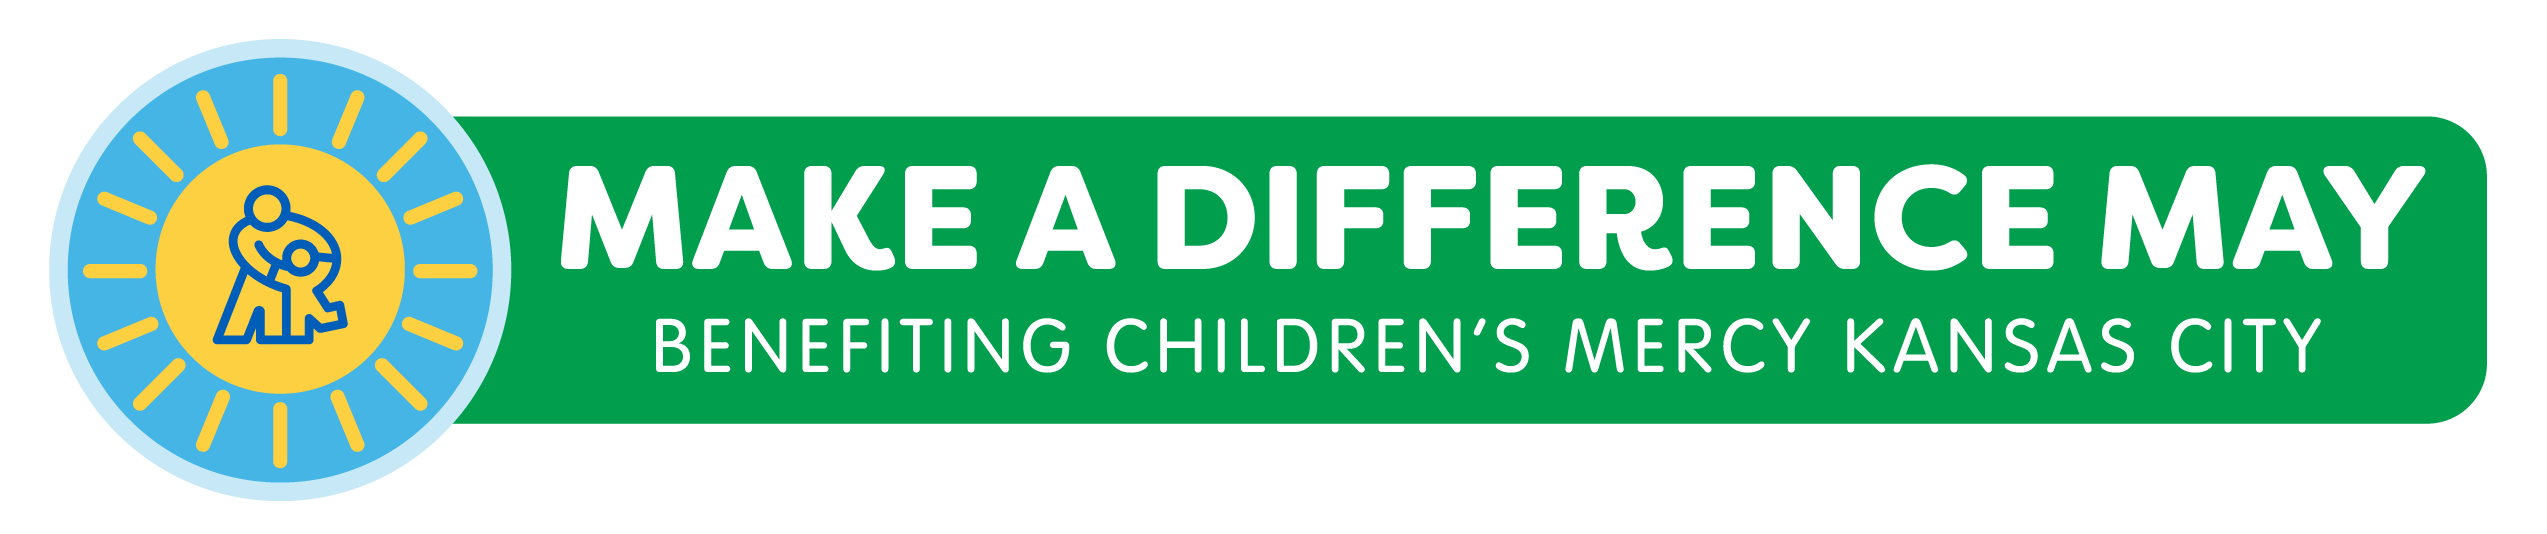 A green banner with white text that reads: Make a Difference May Benefitting Children's Mercy Kansas City.